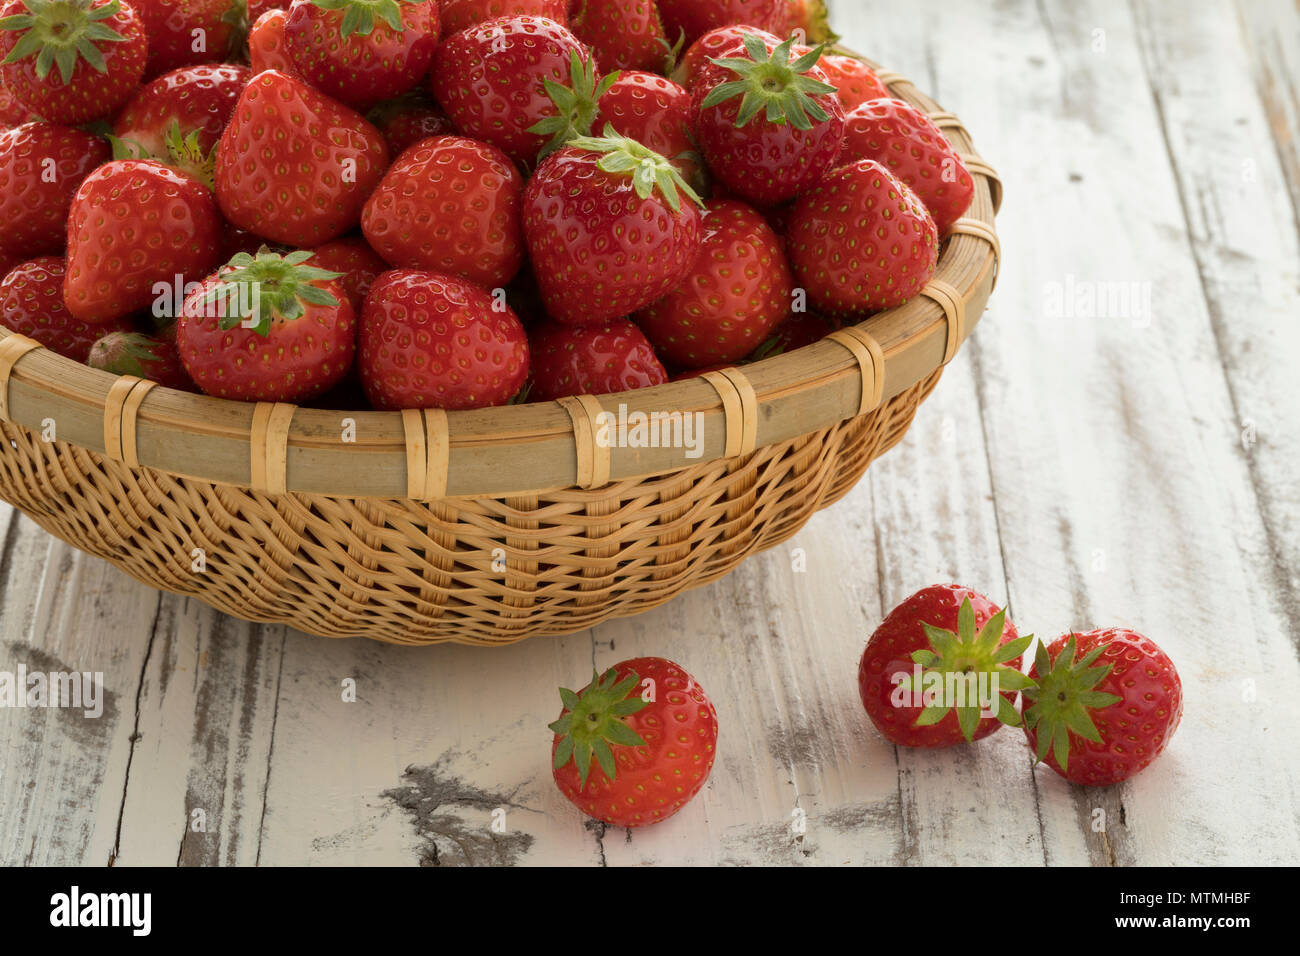 Basket with fresh ripe red strawberries for dessert Stock Photo